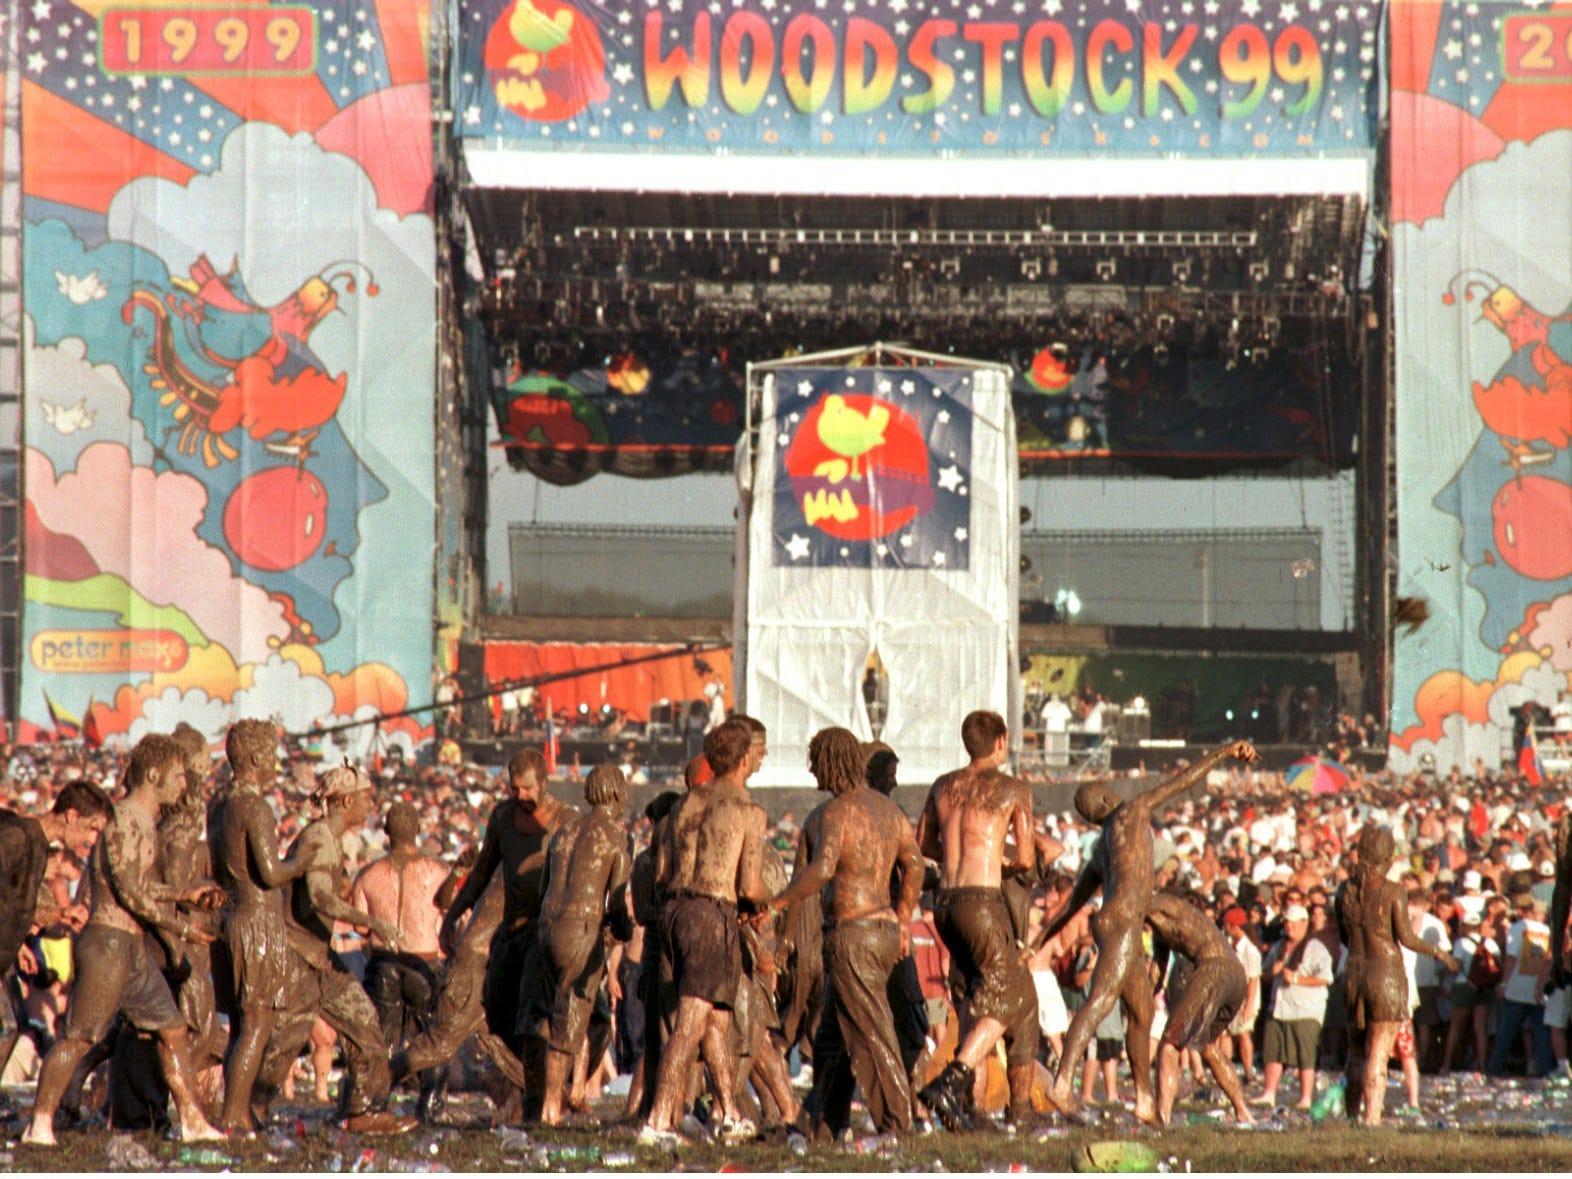 Mud At Woodstock 99 Music Festival Was Actually S Hbo Documentary Business Insider India 3052